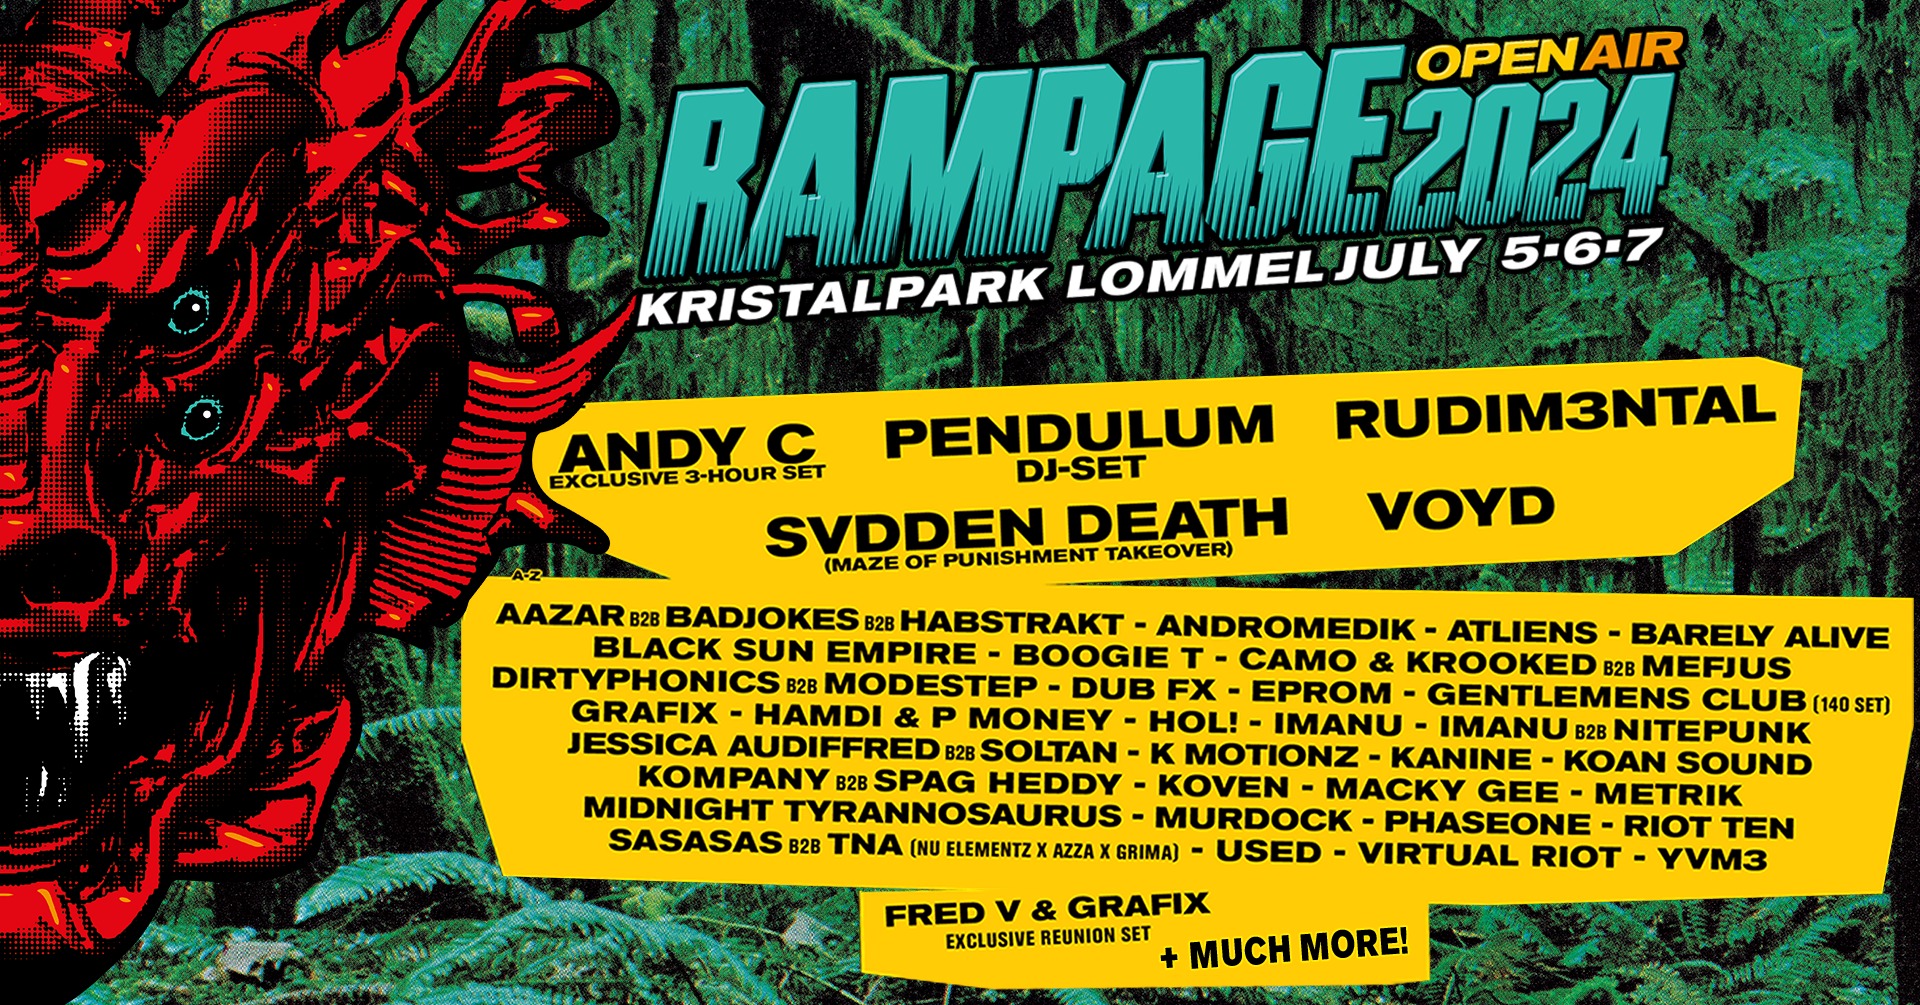 Rampage Open Air 2024